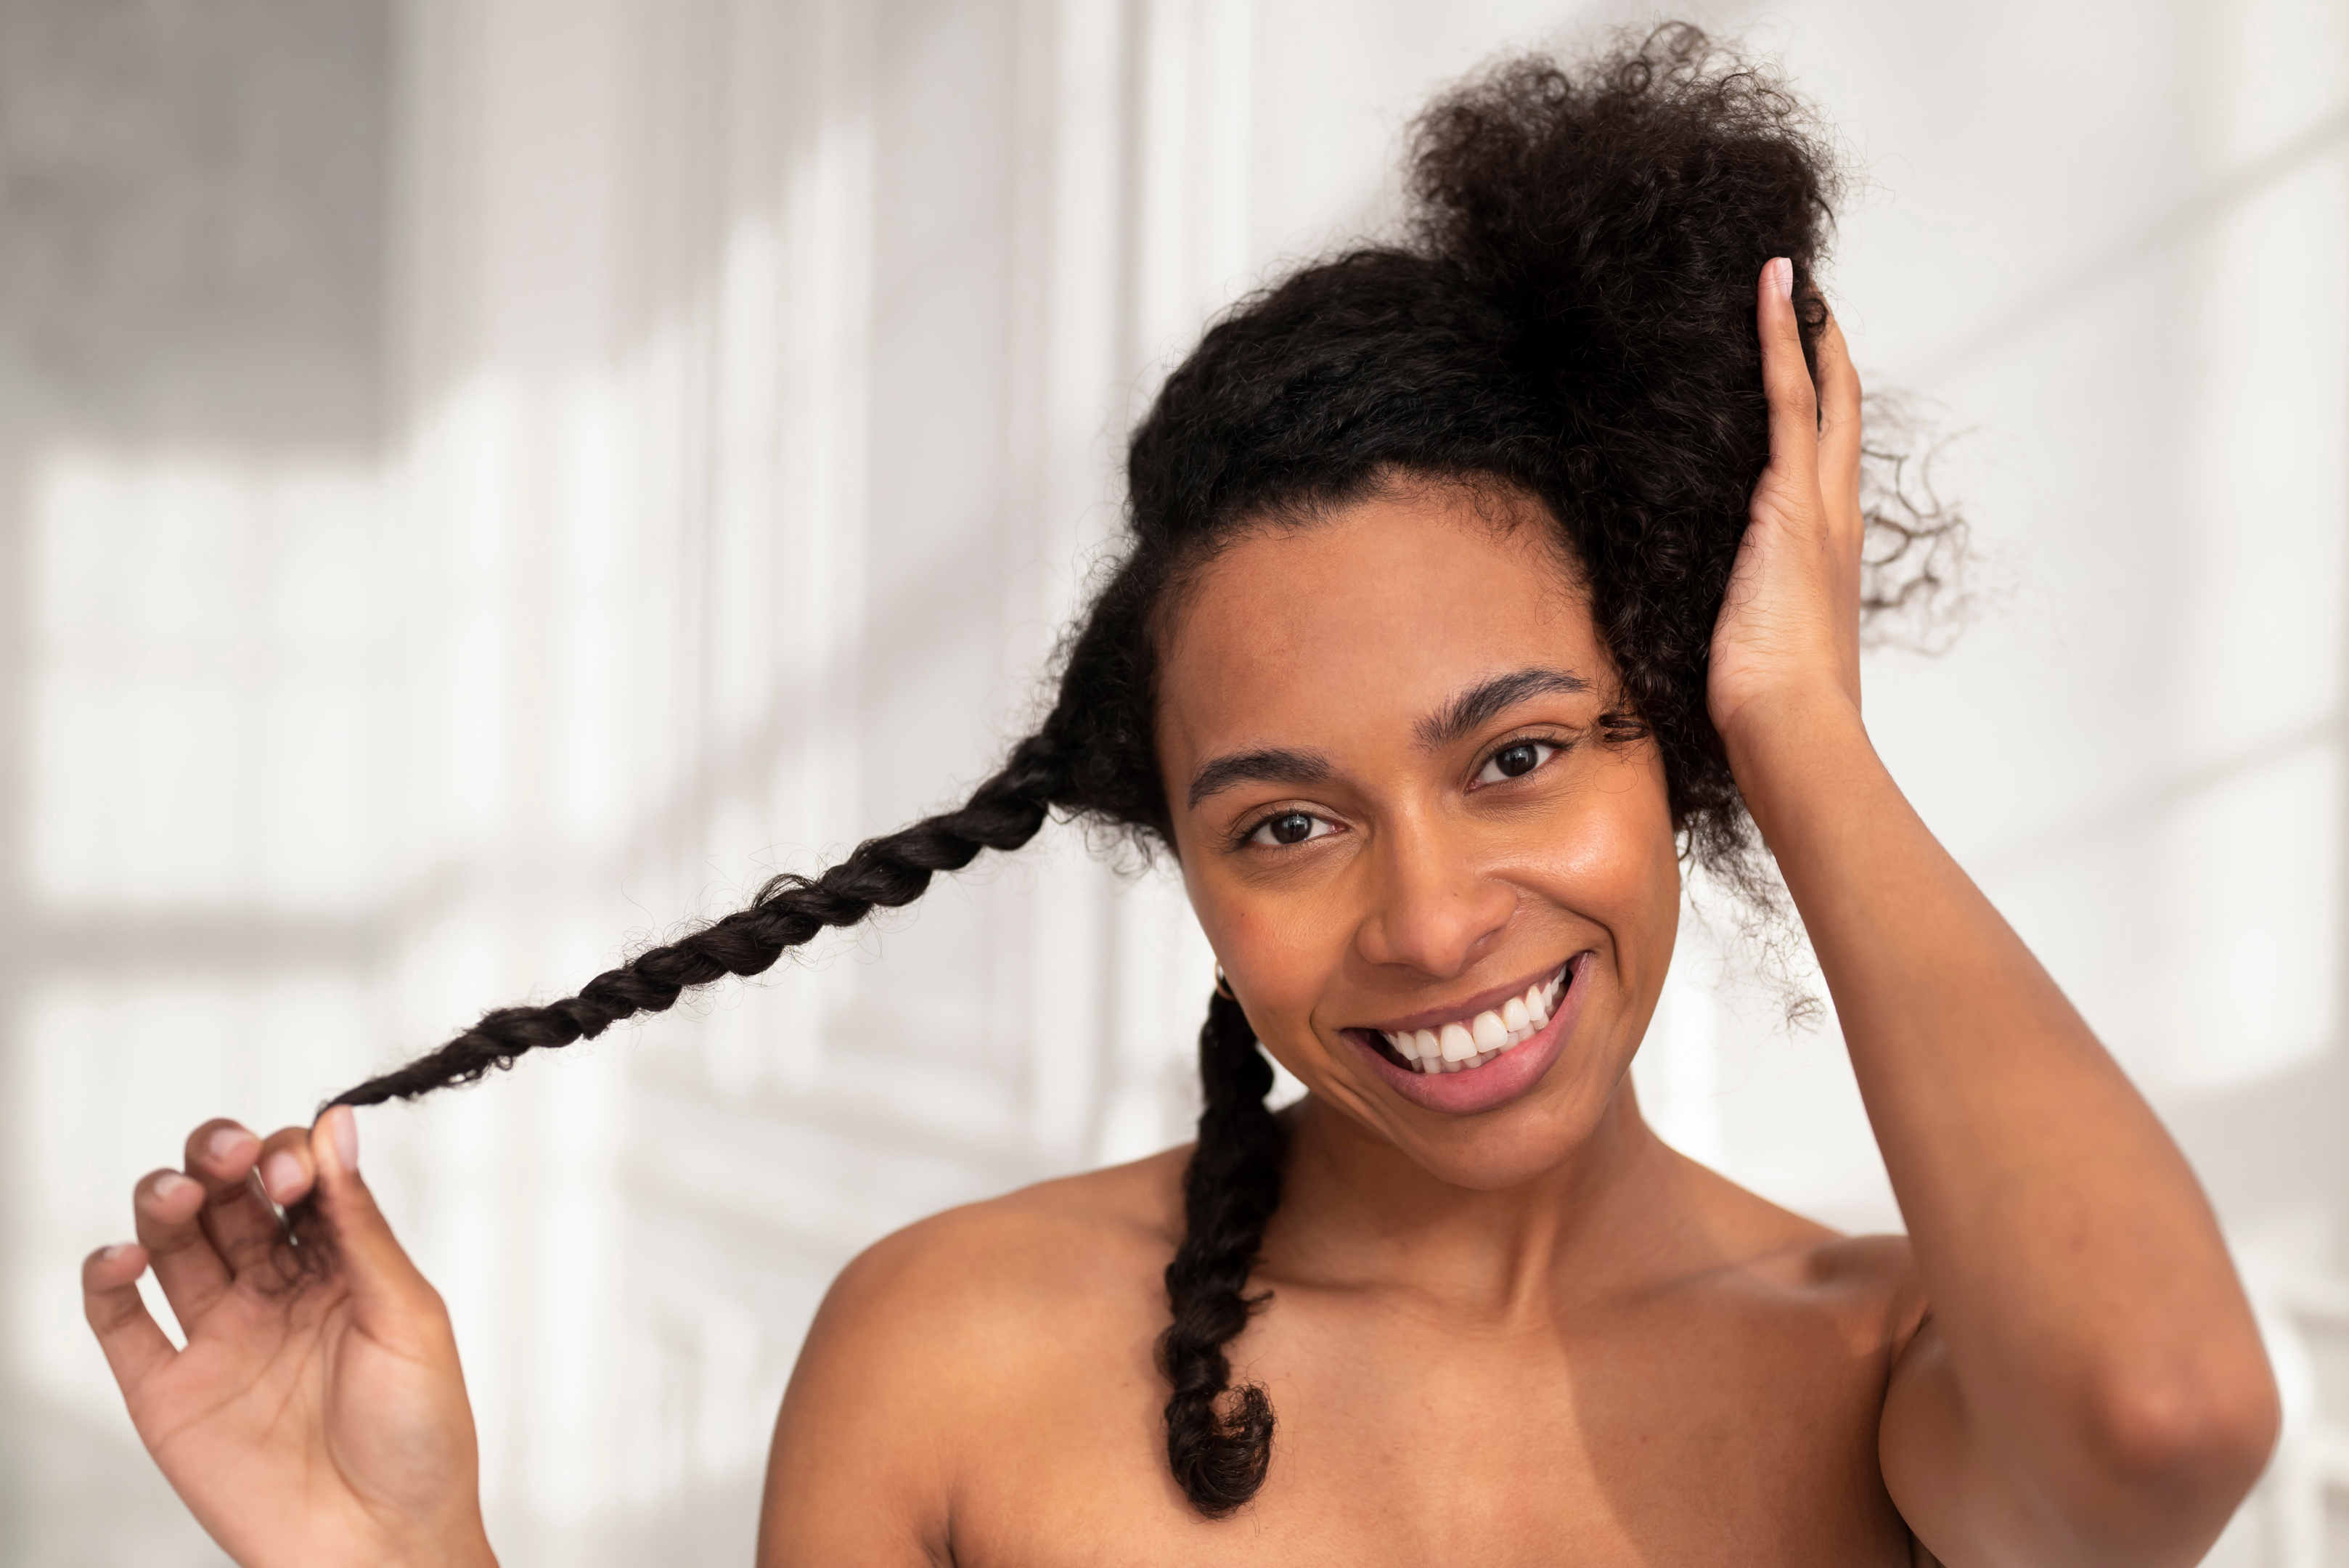 avoid brittle hair, oily hair and chemical damage to your hair by using heat protection, sulphate free shampoo, a hair mask and a wide tooth comb. 